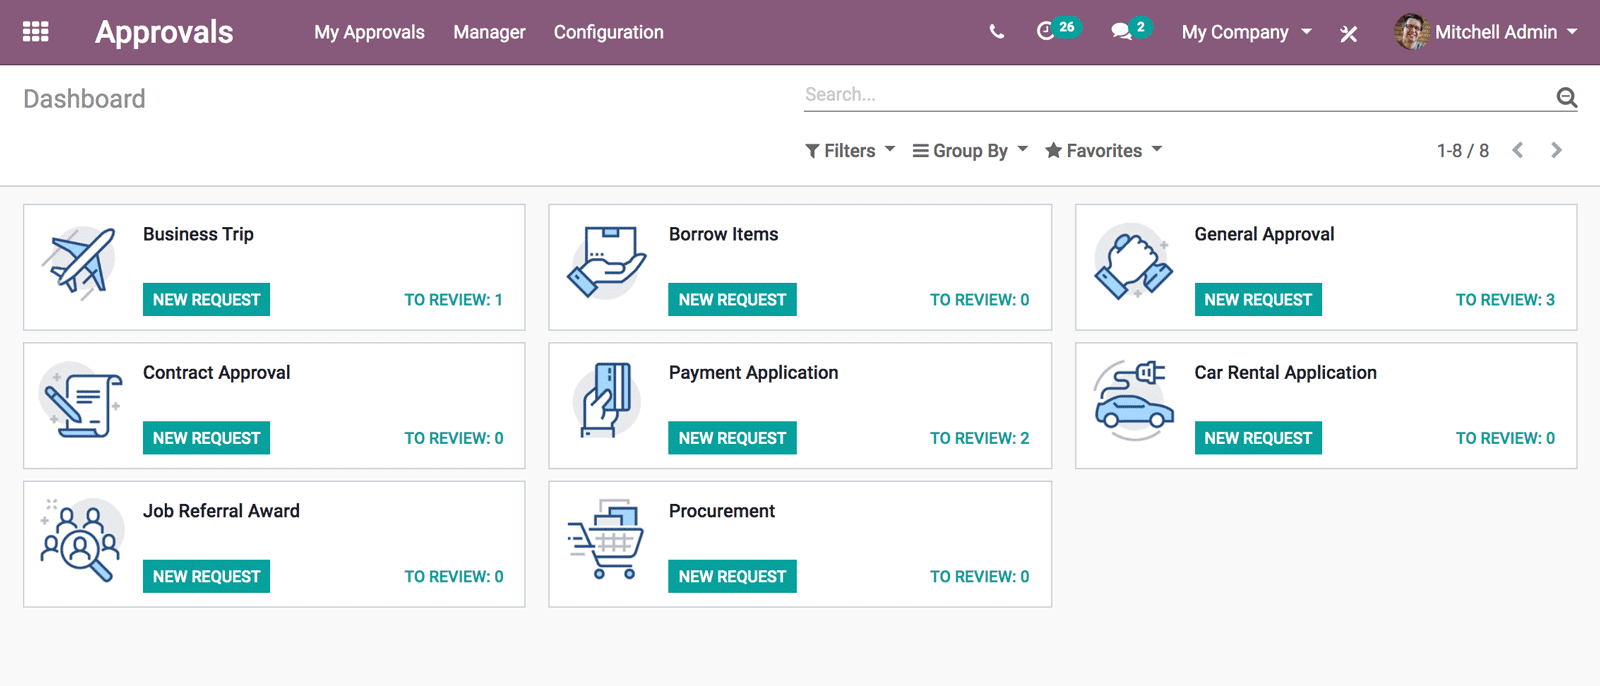 Odoo Approvals' Dashboard interface showing types of requests